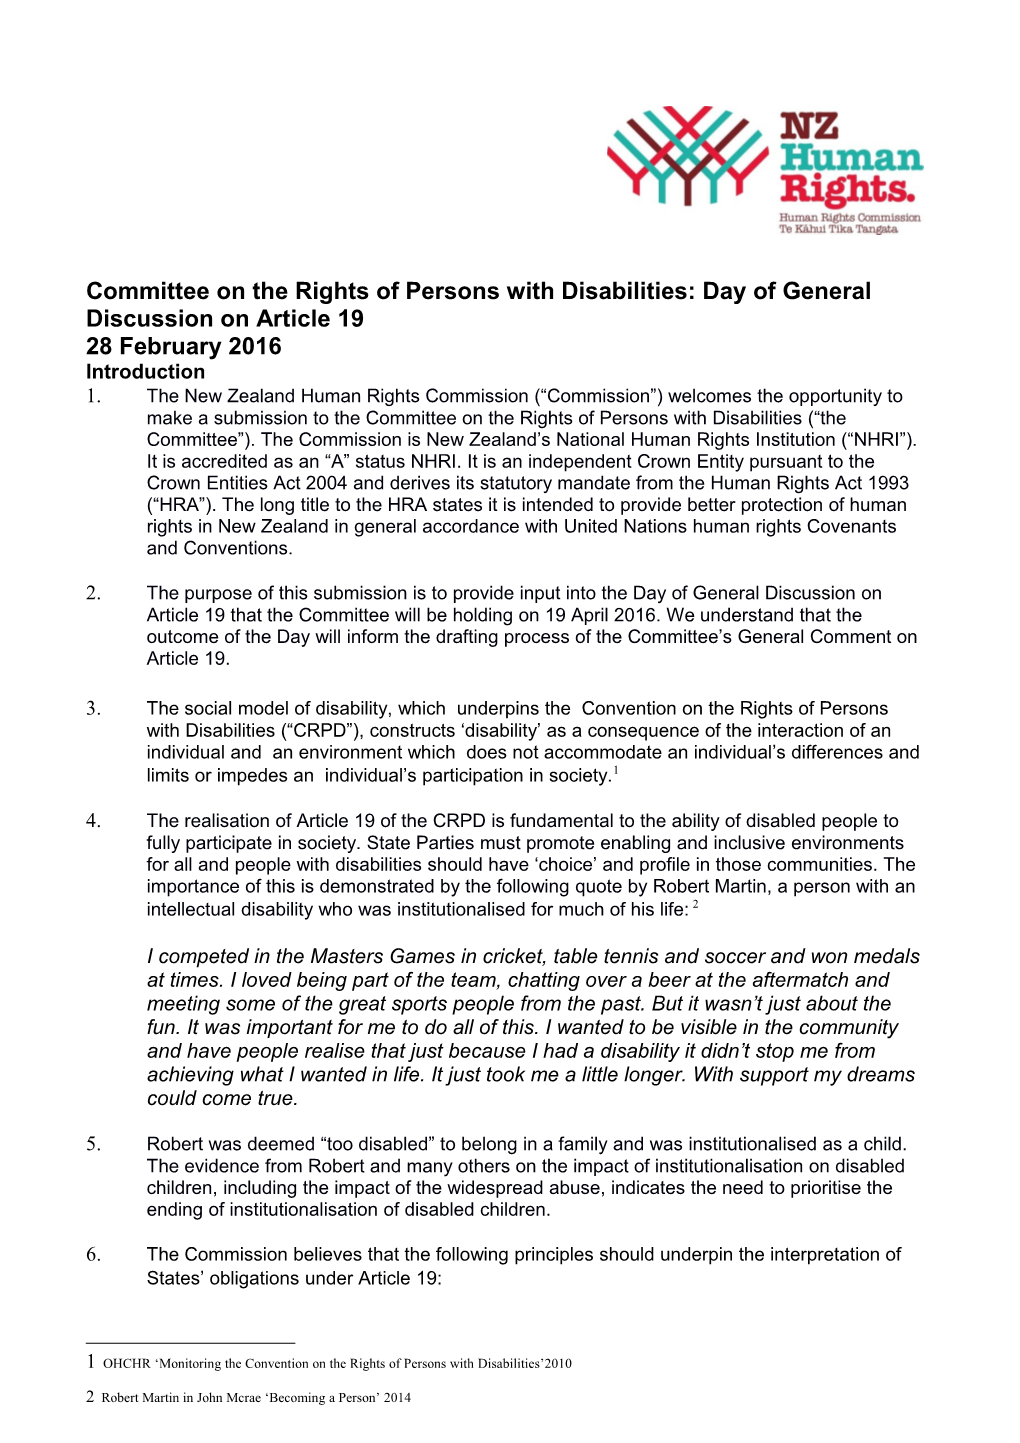 Committee on the Rights of Persons with Disabilities: Day of General Discussion on Article 19 s1